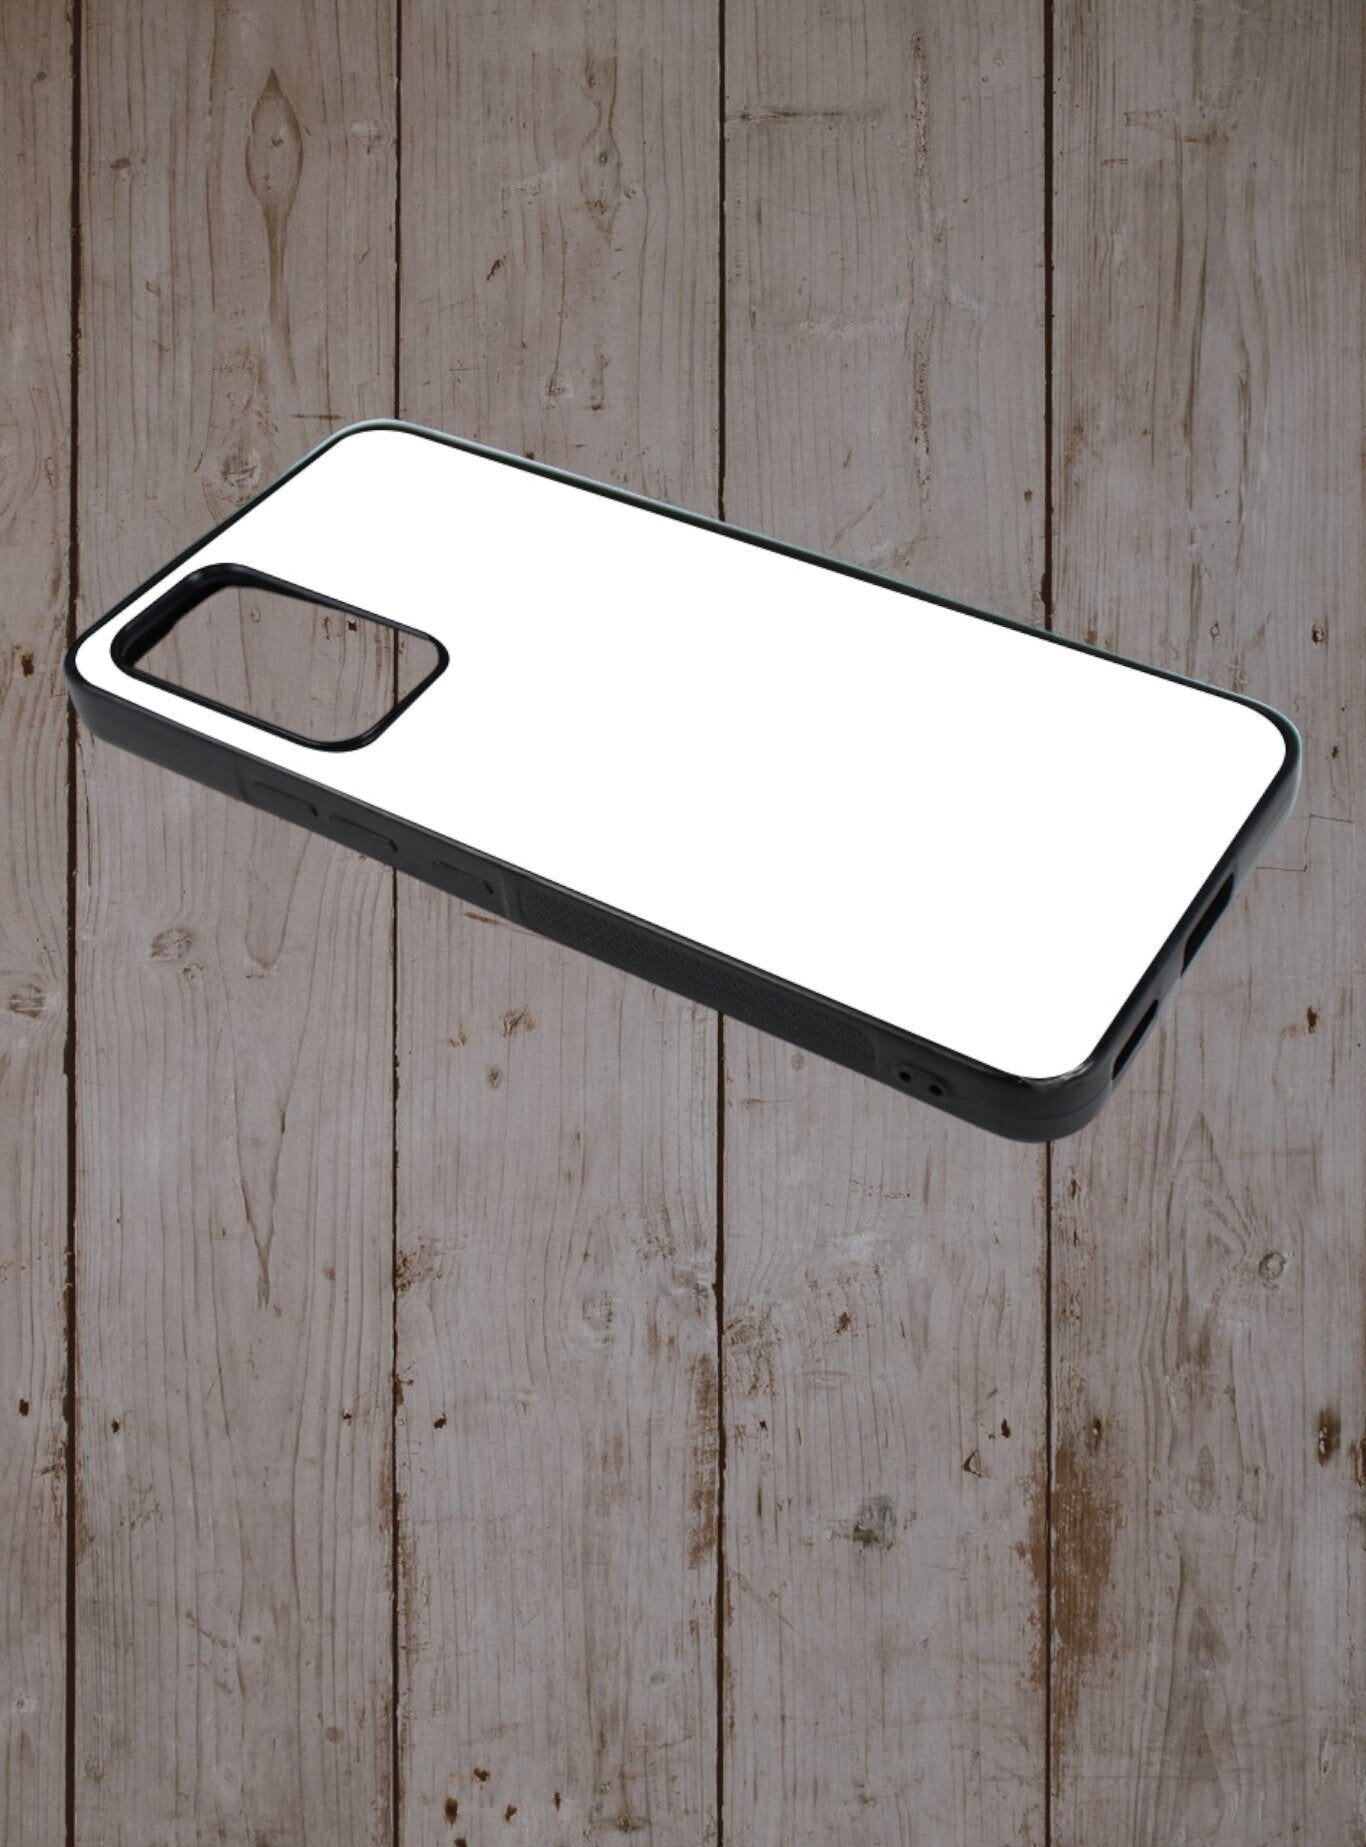 Coque Oppo A - Loup